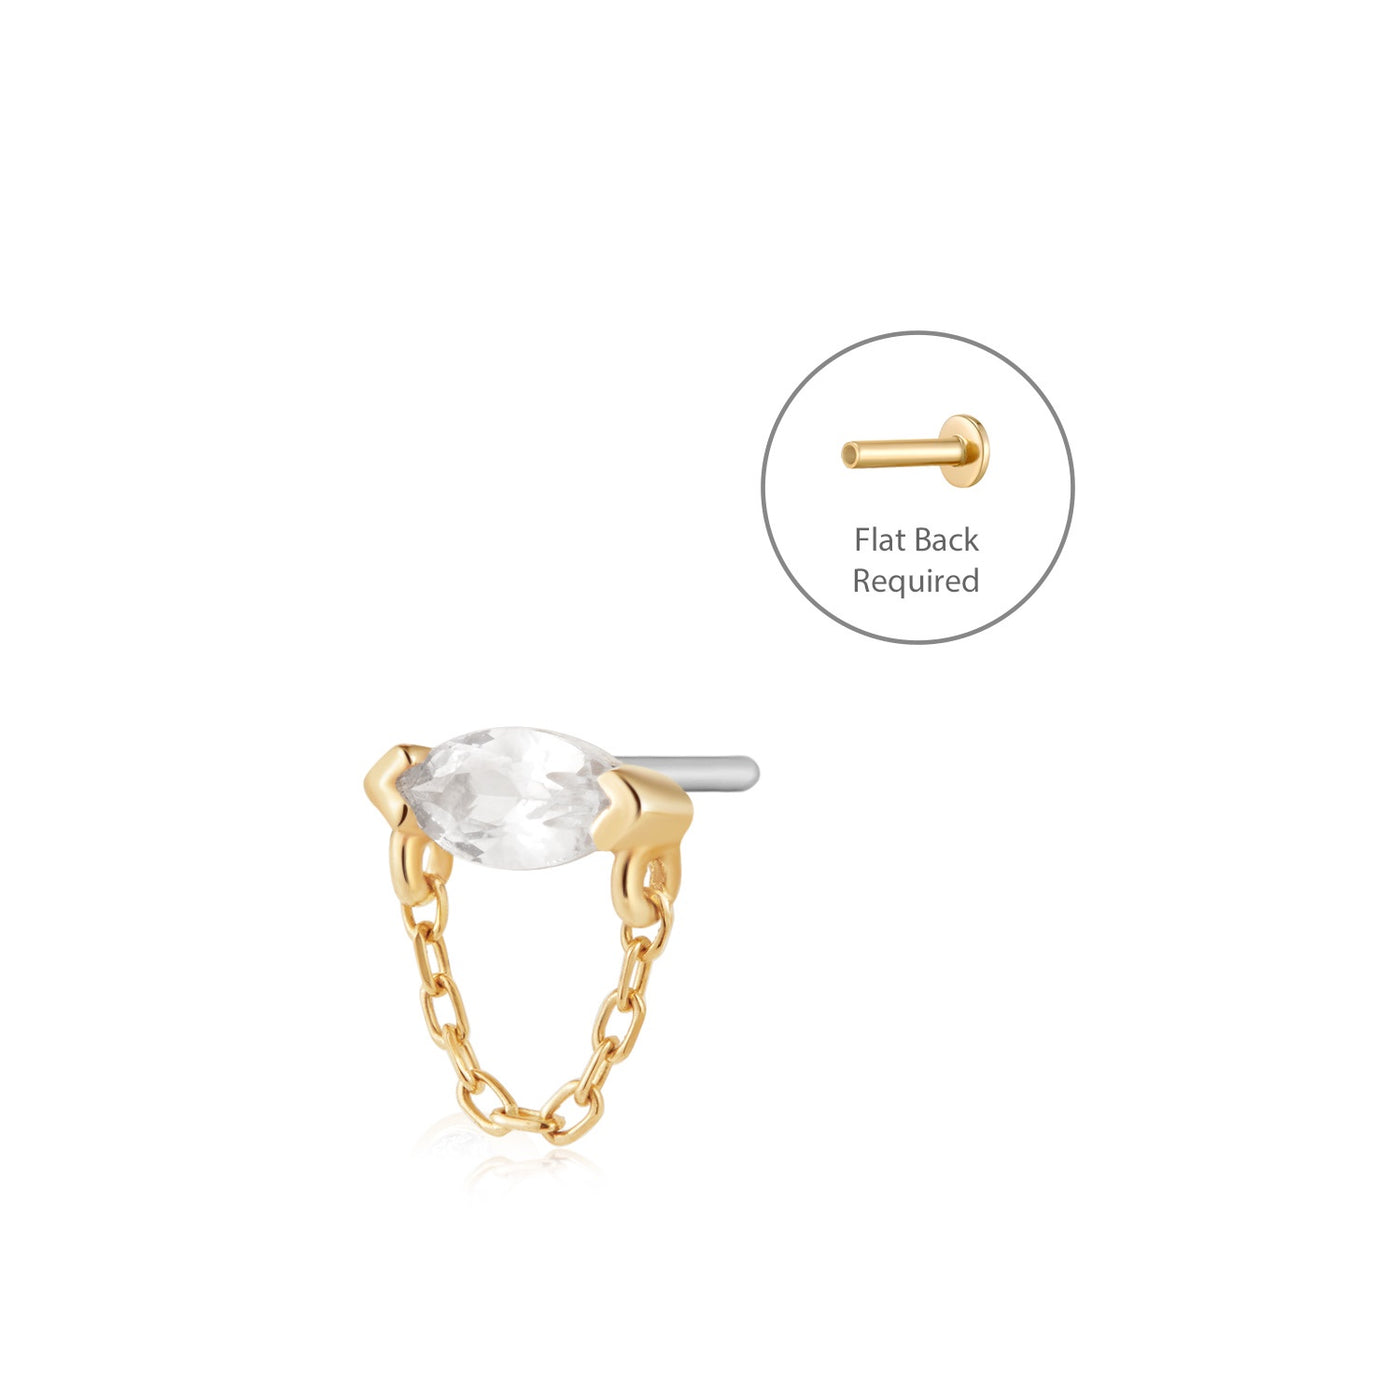 LENOX | Draped Chain and White Sapphire Piercing Top Earring